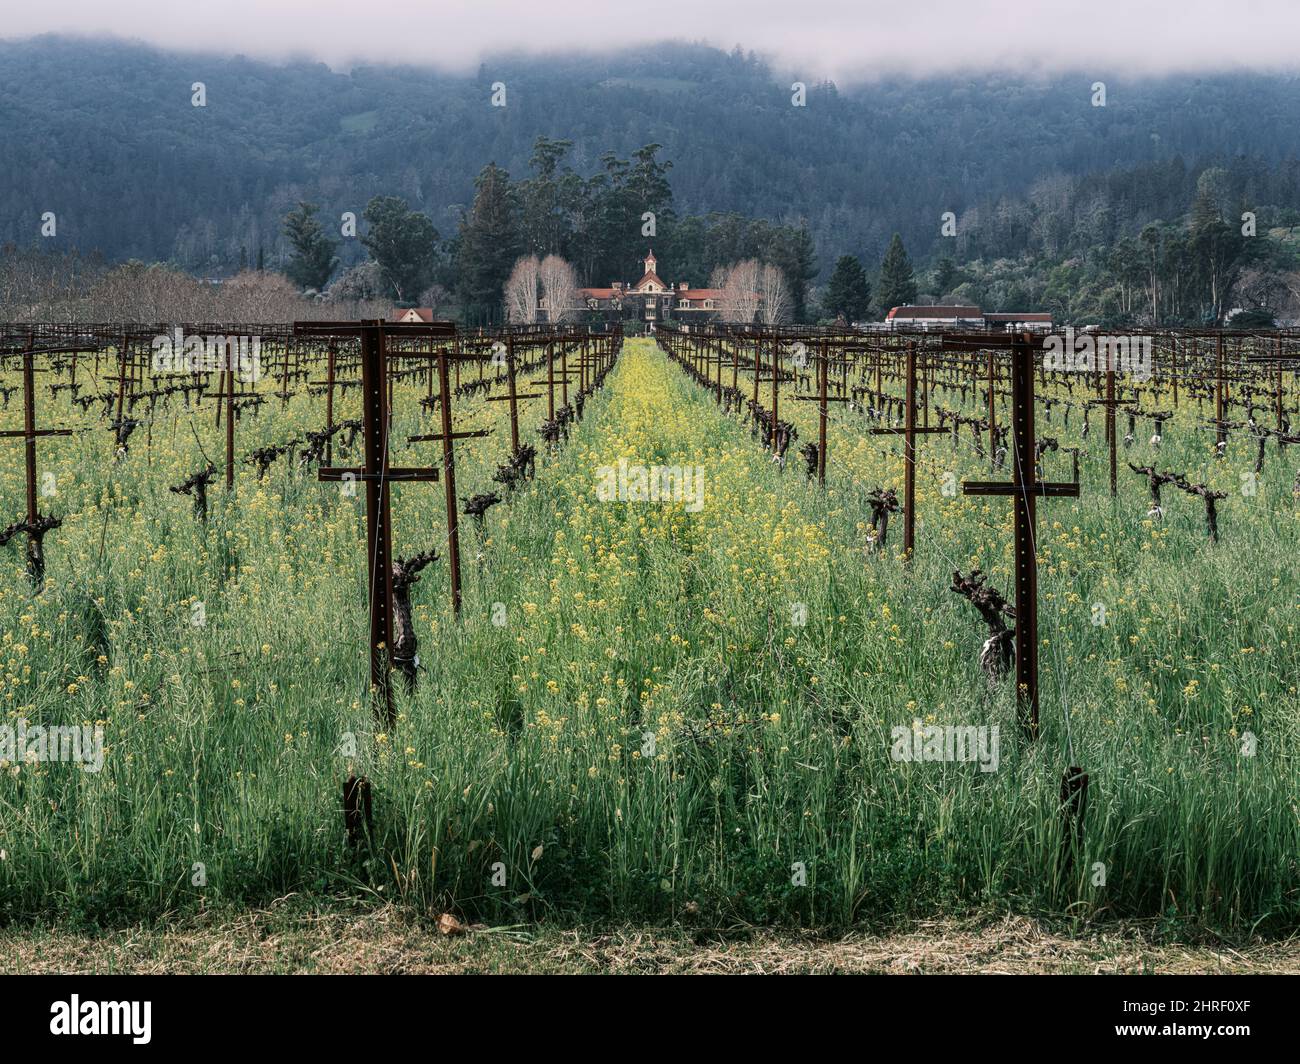 An atmospheric vineyard landscape with a foreground of mustard flowers. Napa Valley, California. Stock Photo